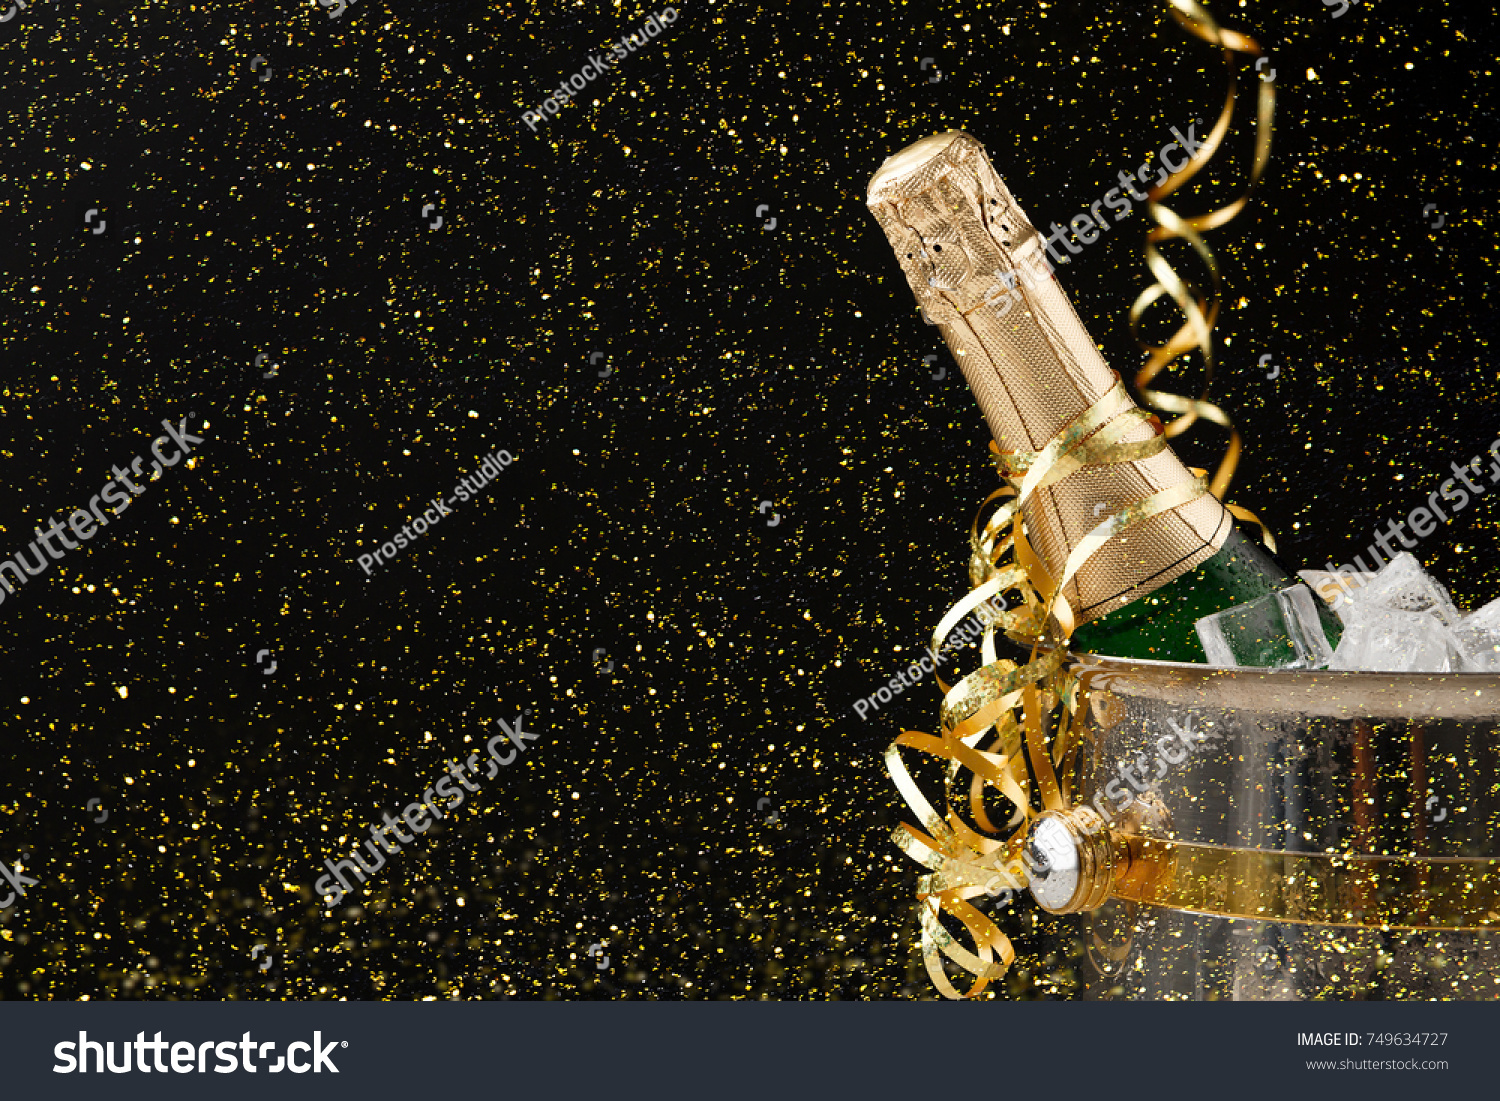 Celebrating new year, birthday, xmas party. Bottle of champagne in a bucket and colorful tinsel on black backgroud with golden glitters, copy space. Mockup for postcard #749634727